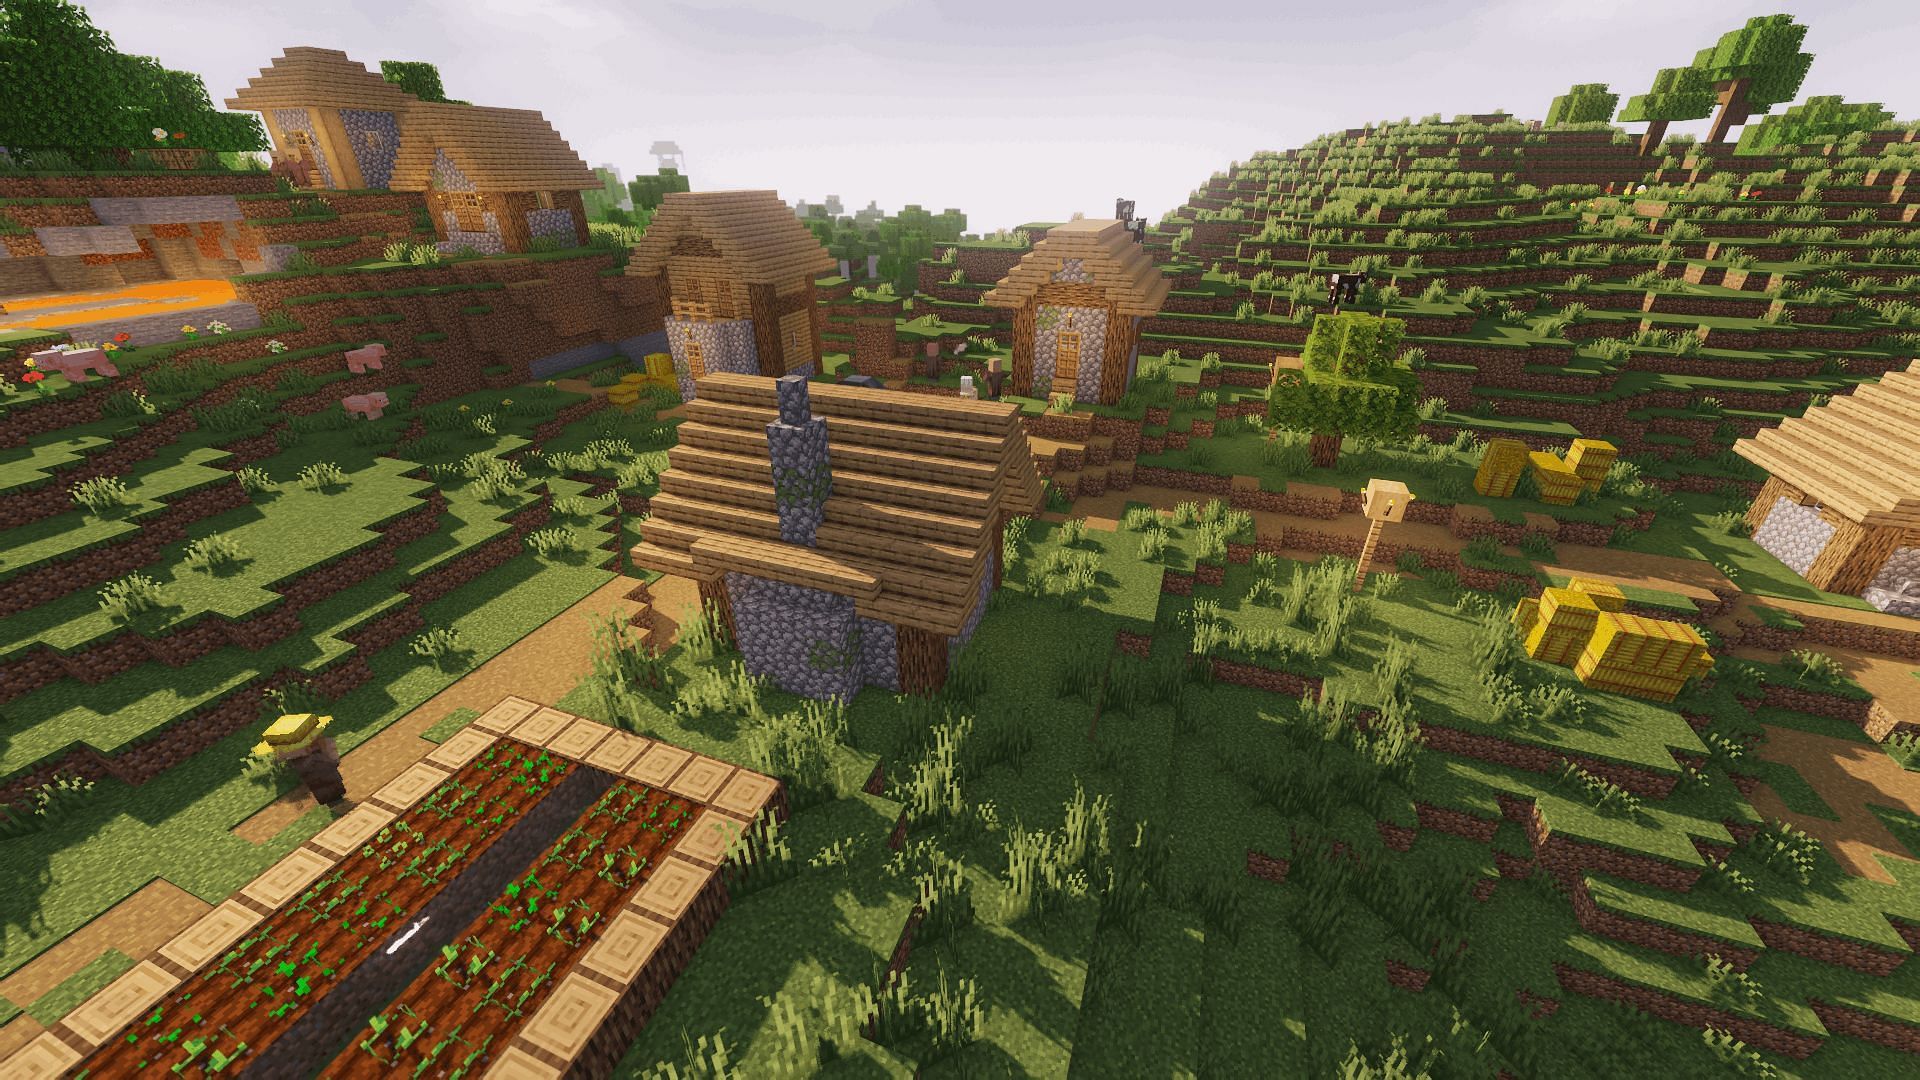 The plains village using the MakeUp Ultra Fast shader (Image via Minecraft)